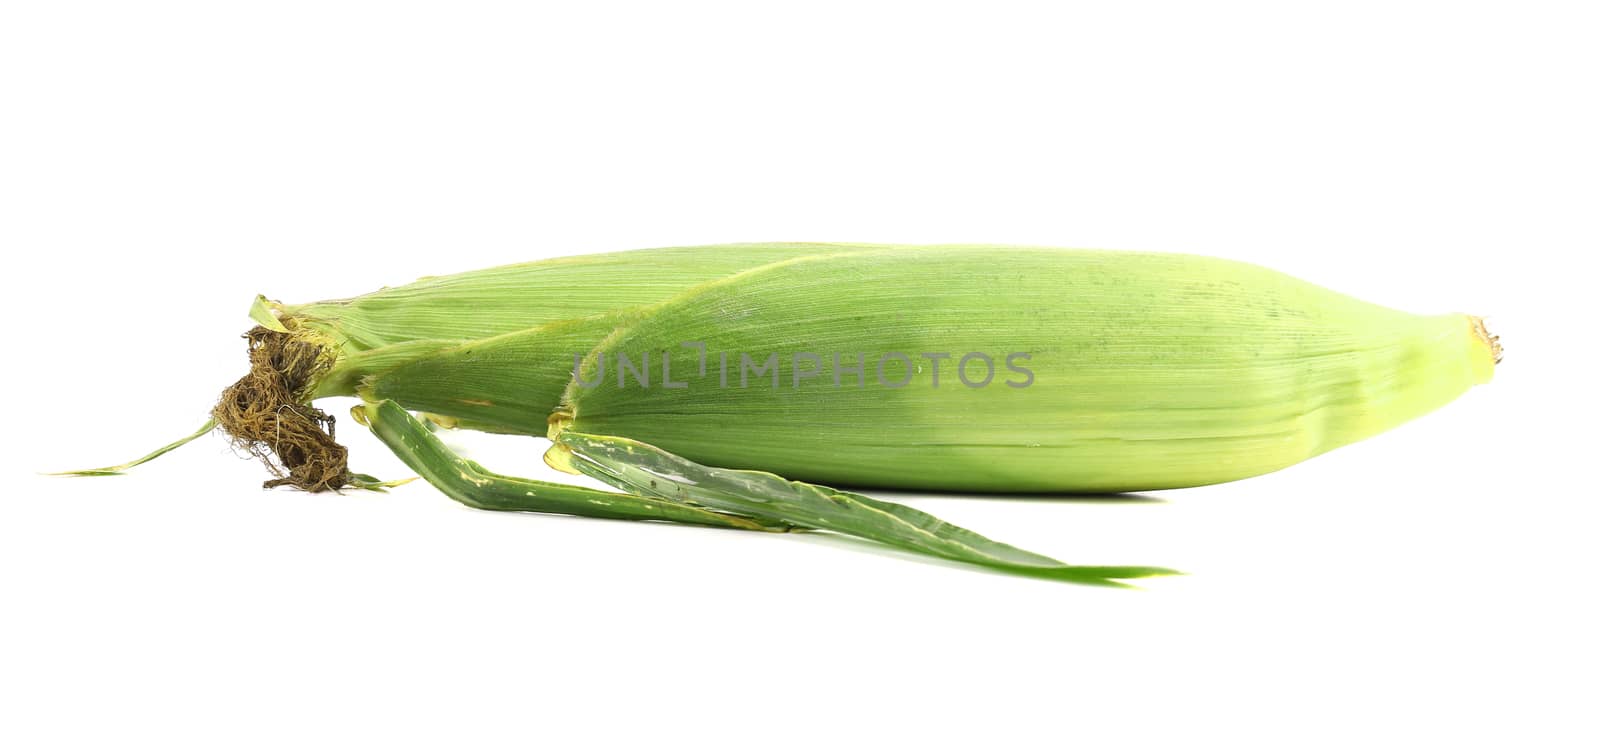 Closed corn cob. Isolated on a white background